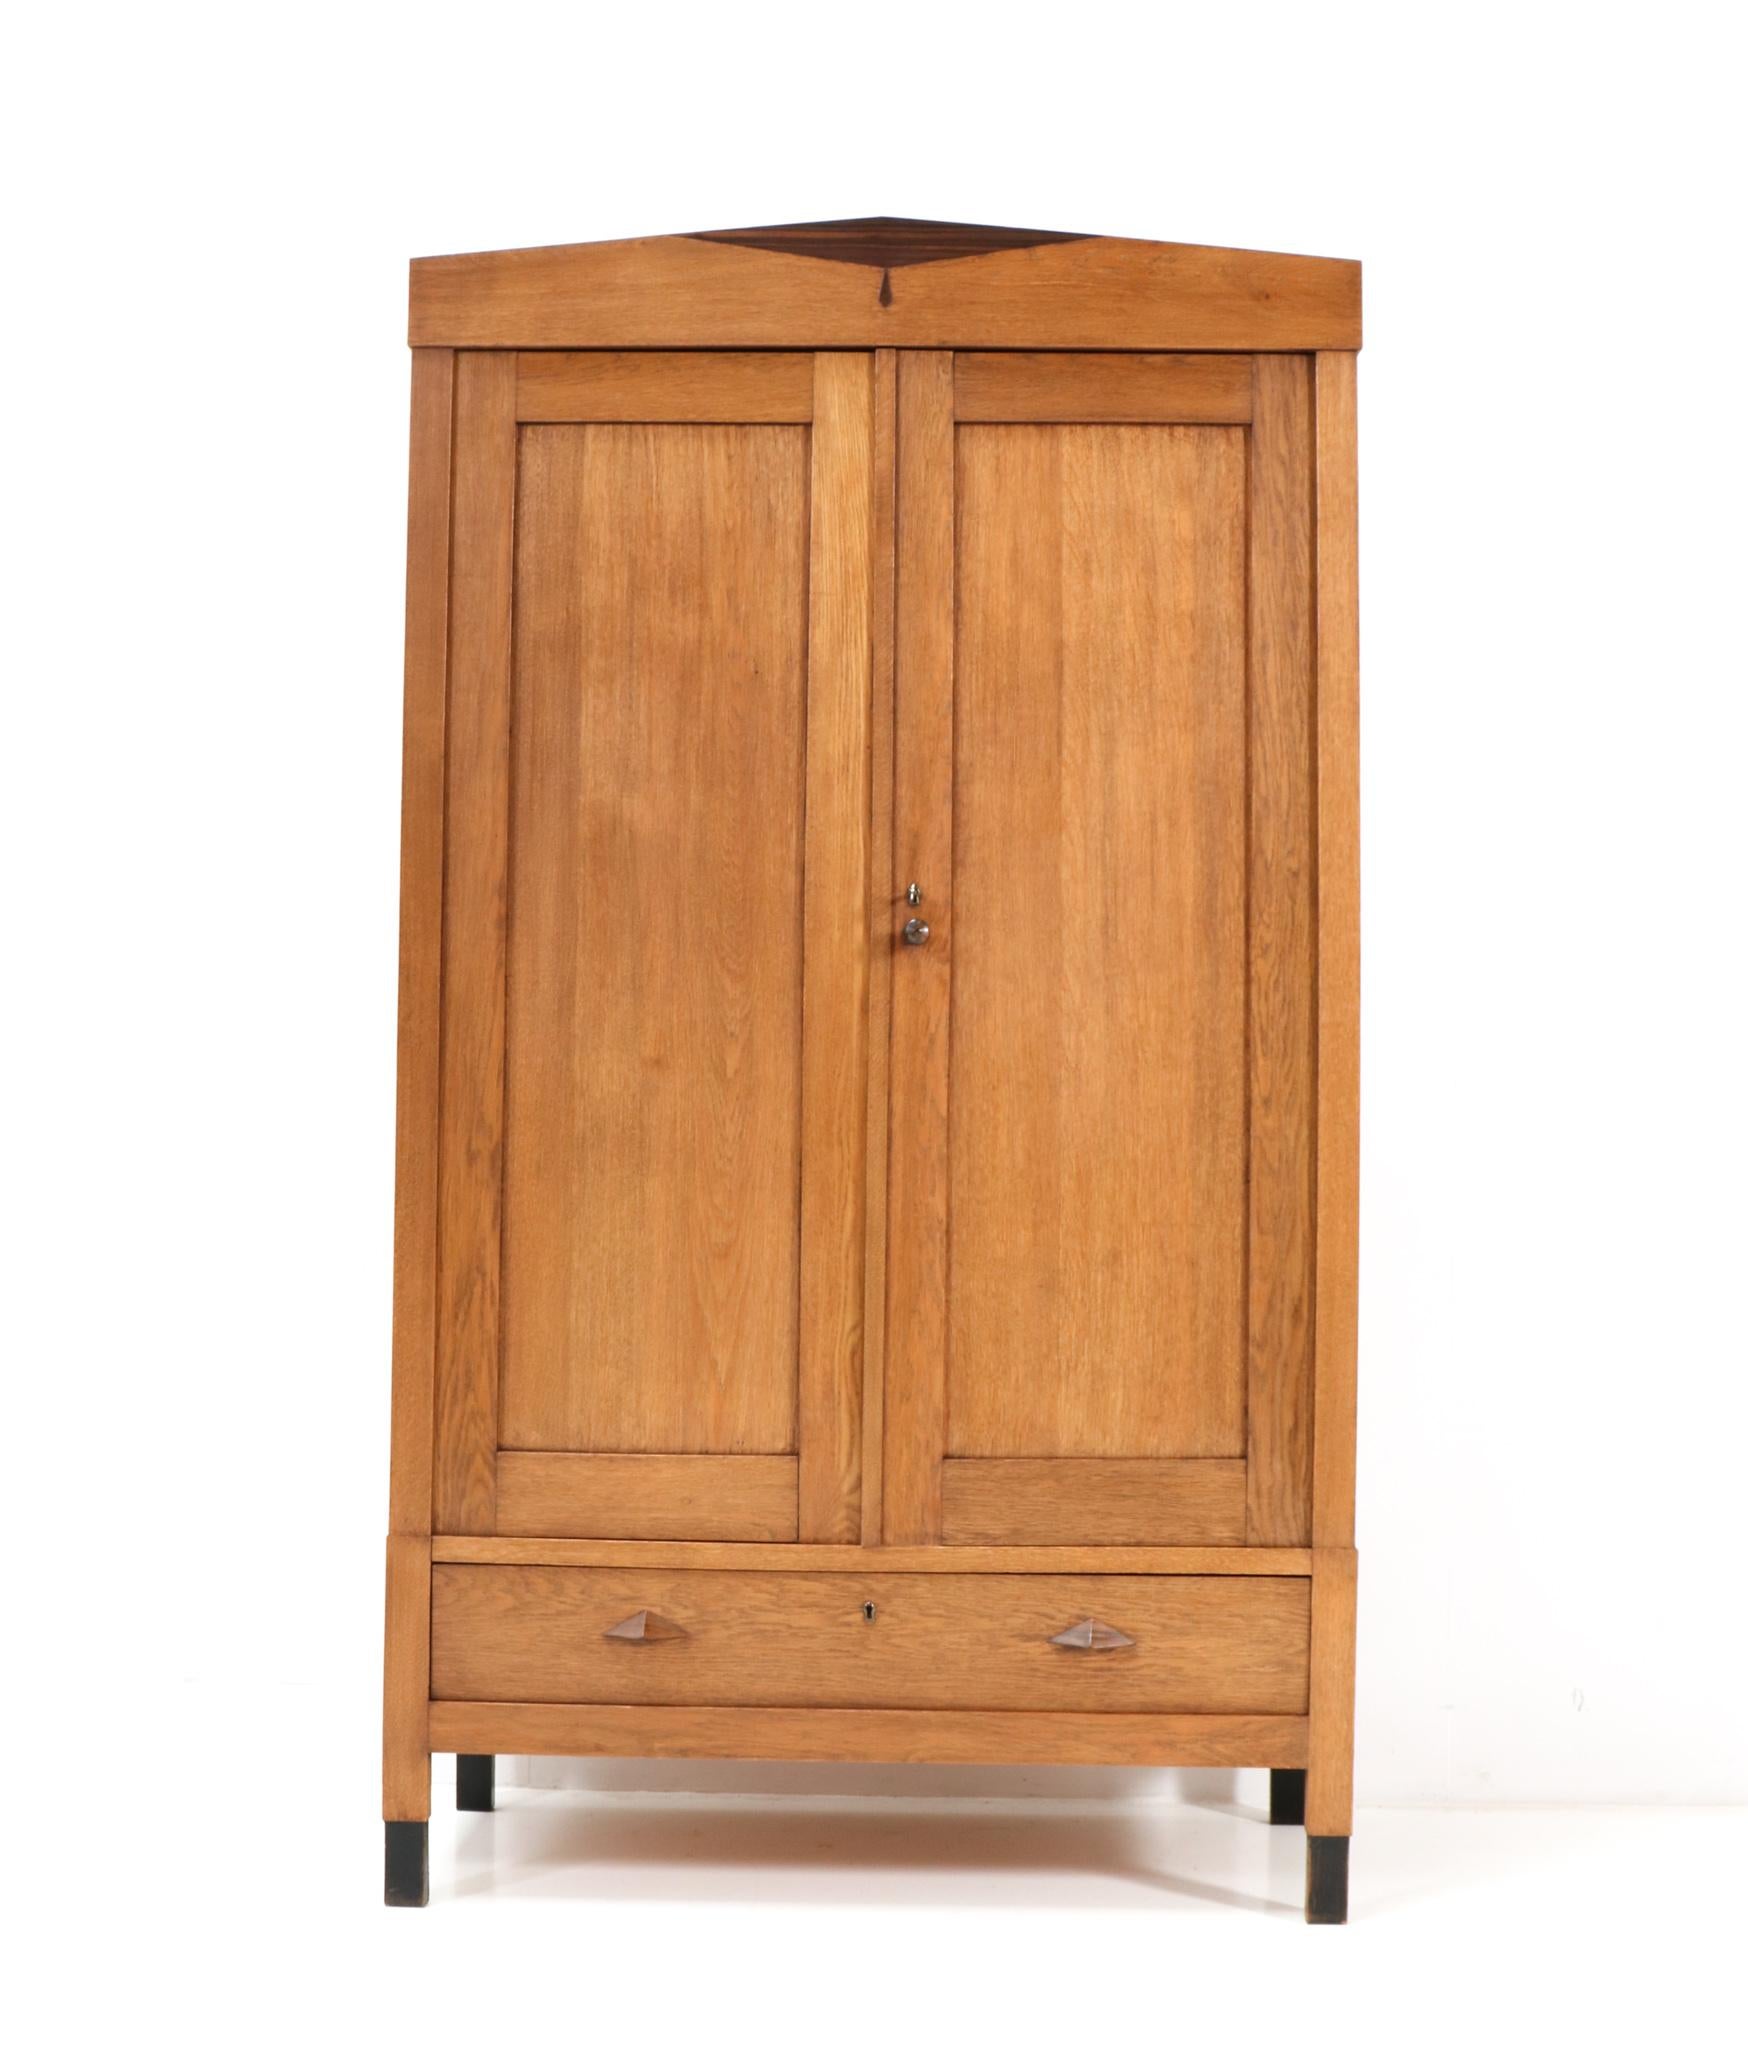 Stunning and rare Art Deco Amsterdamse School armoire or wardrobe.
Striking Dutch design from the 1920s.
Solid oak and oak triplex with original solid macassar ebony knob on the 
right door.
The drawer has also two original solid macassar ebony